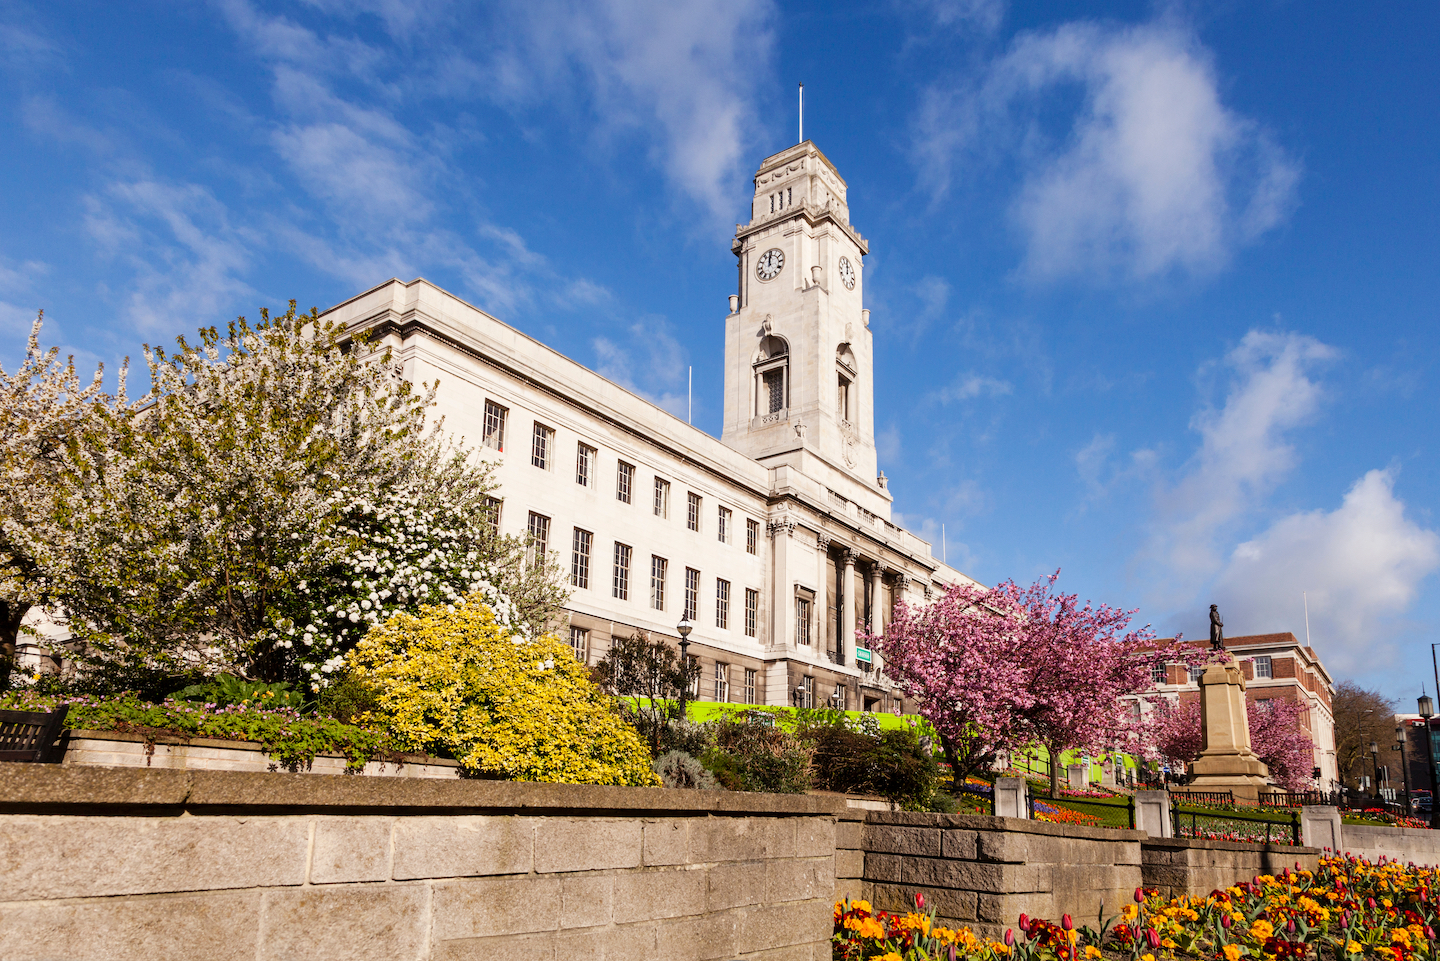 Barnsley Town Hall on a fine spring day, with blue sky and gardens in bloom.